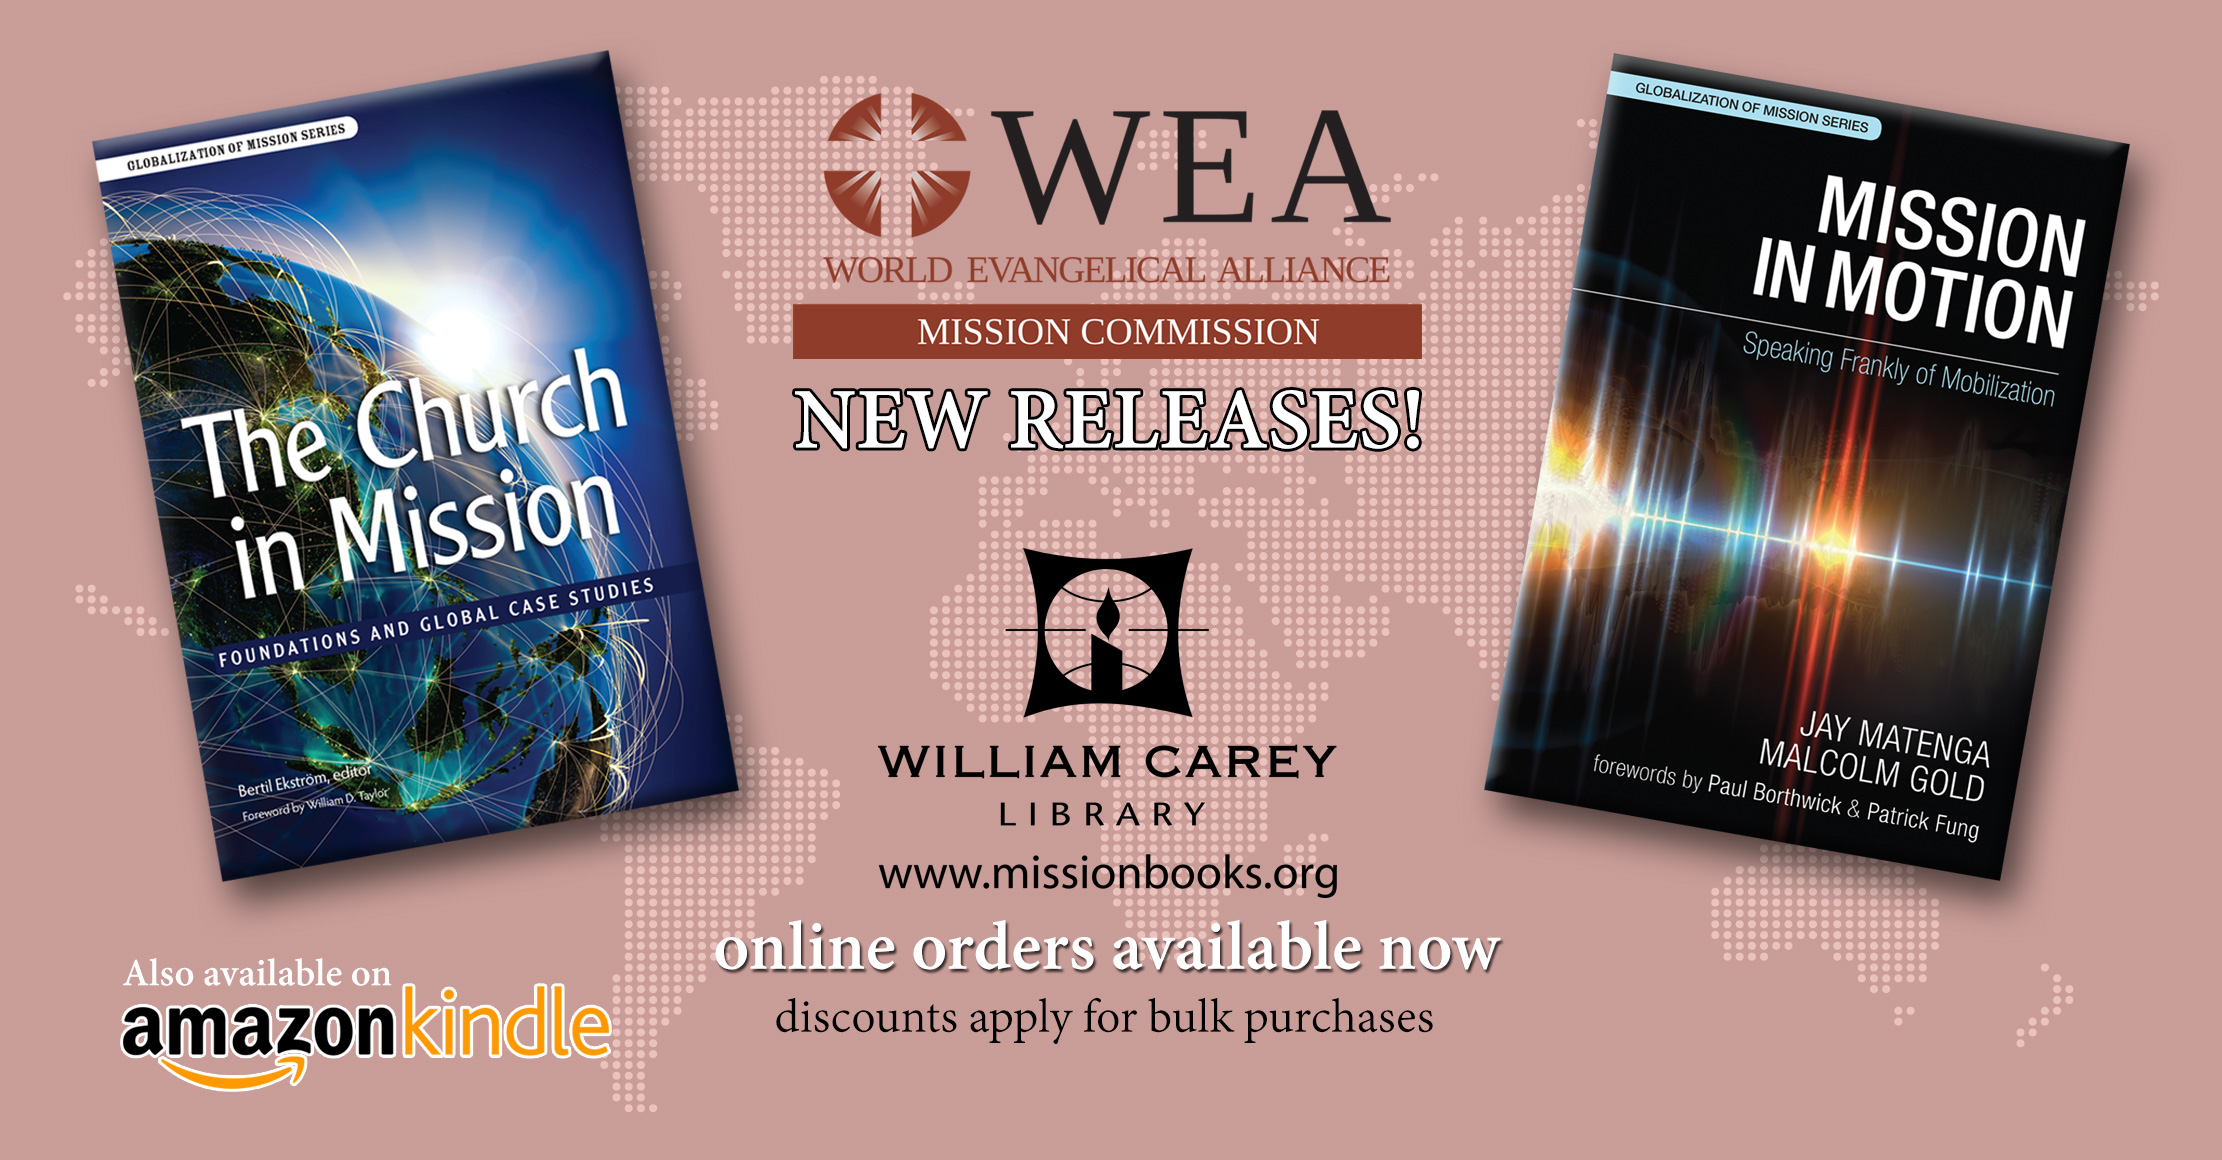 Two recent Mission Commission books for reflection in 2017